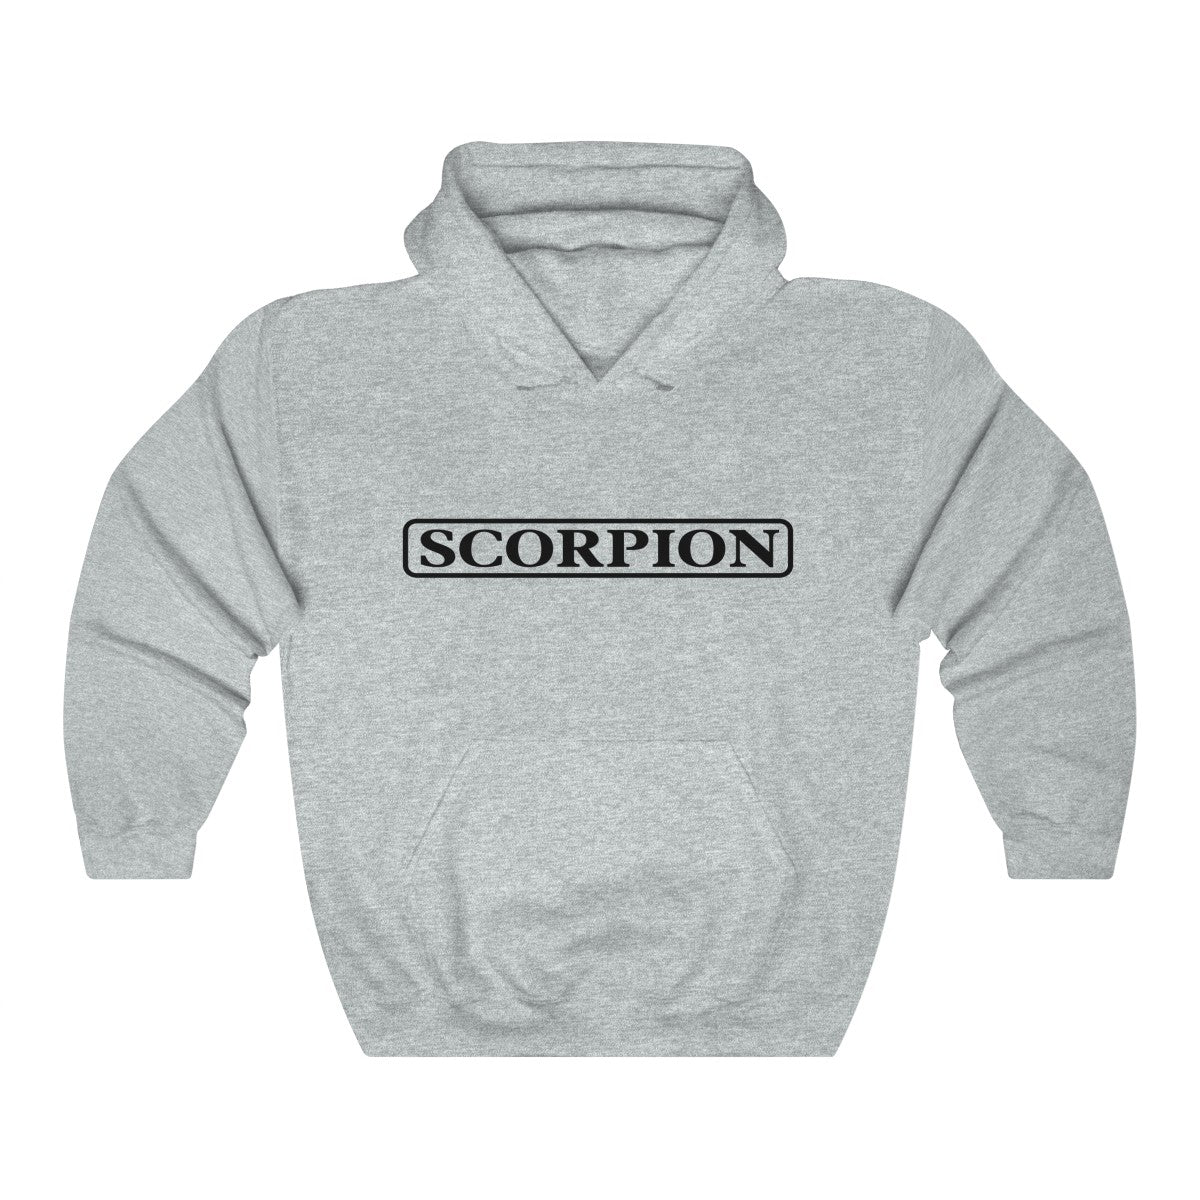 Scorpion Drizzy Drake Scary Hours Merch Inspired Heavy Blend™ Hoodie-Ash-S-Archethype